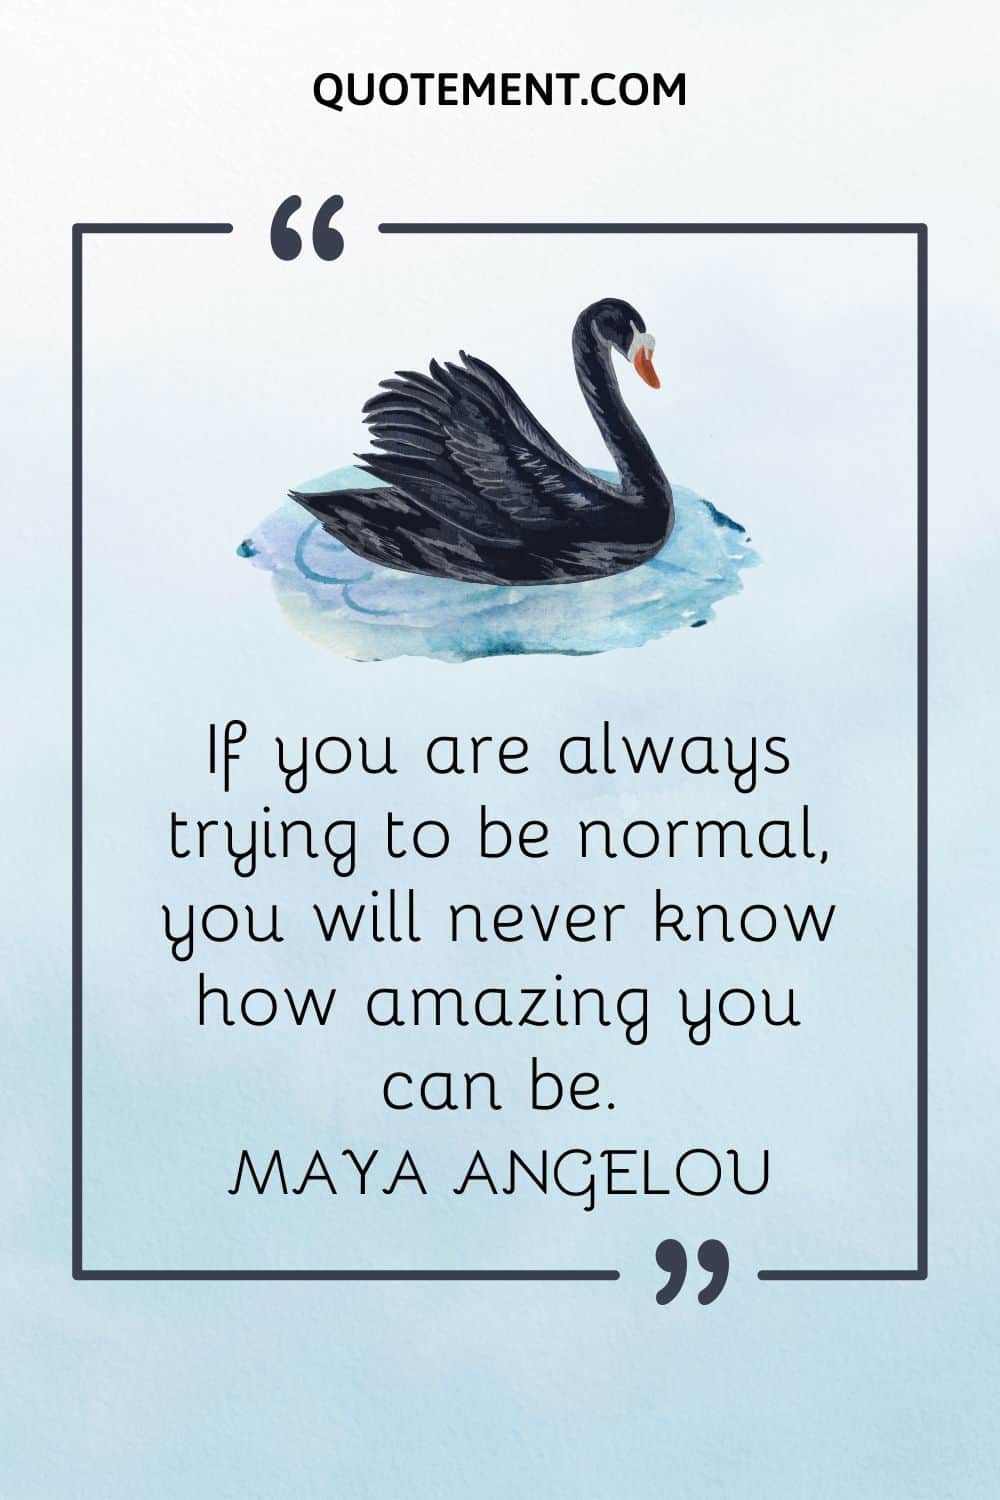 If you are always trying to be normal, you will never know how amazing you can be